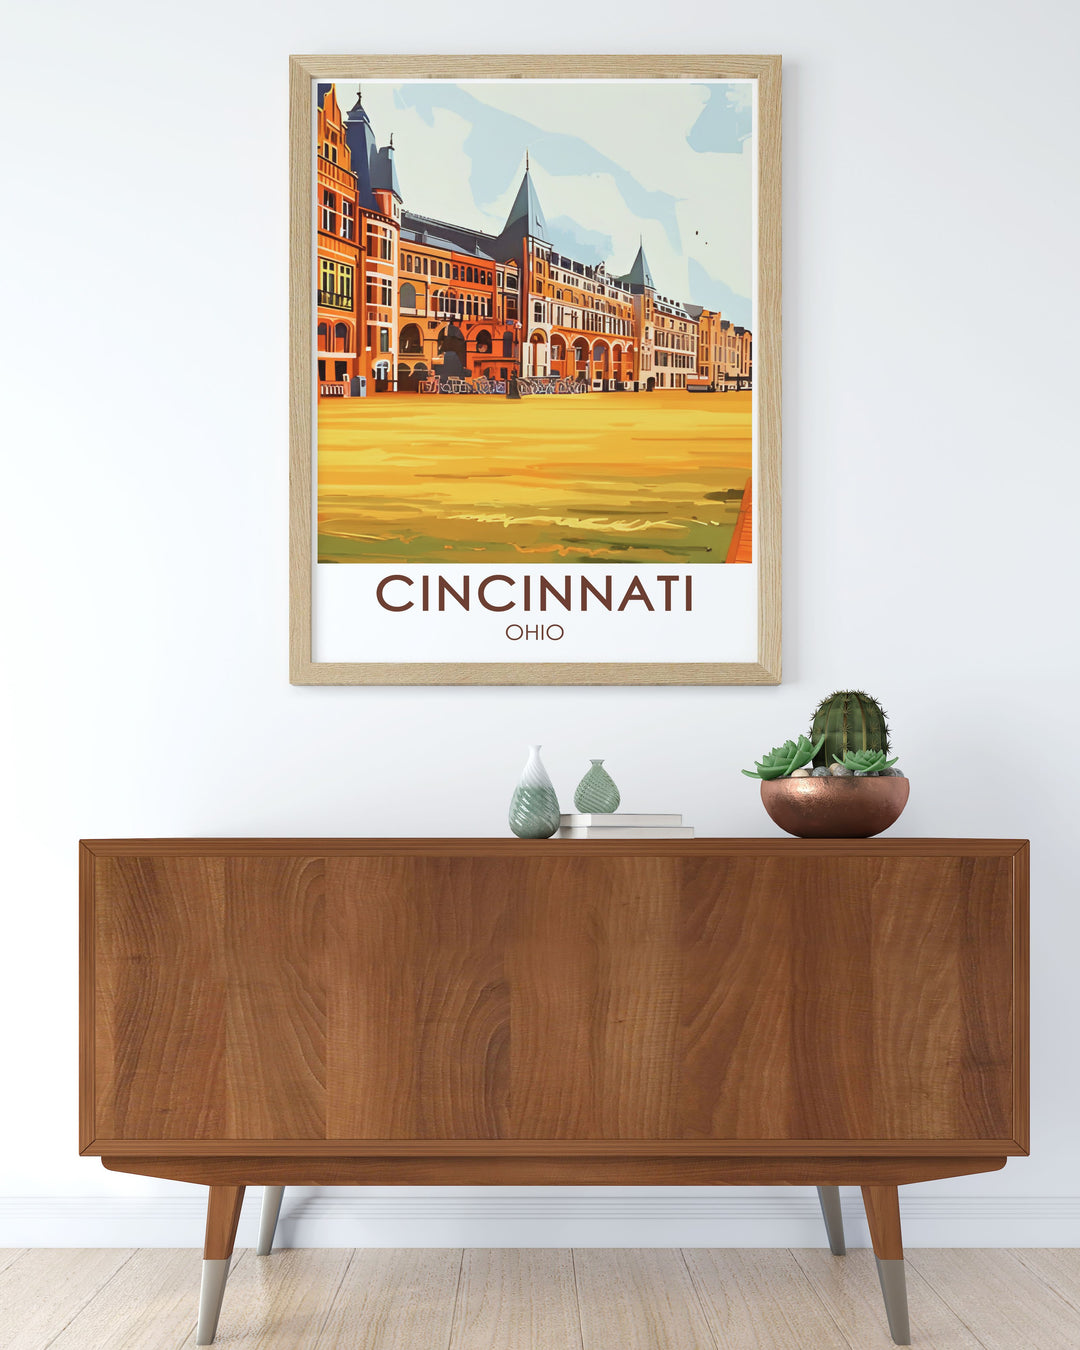 Discover the elegance of Cincinnati with a travel poster featuring the iconic Music Hall. This print highlights the architectural beauty and cultural significance of one of Ohios most beloved landmarks.